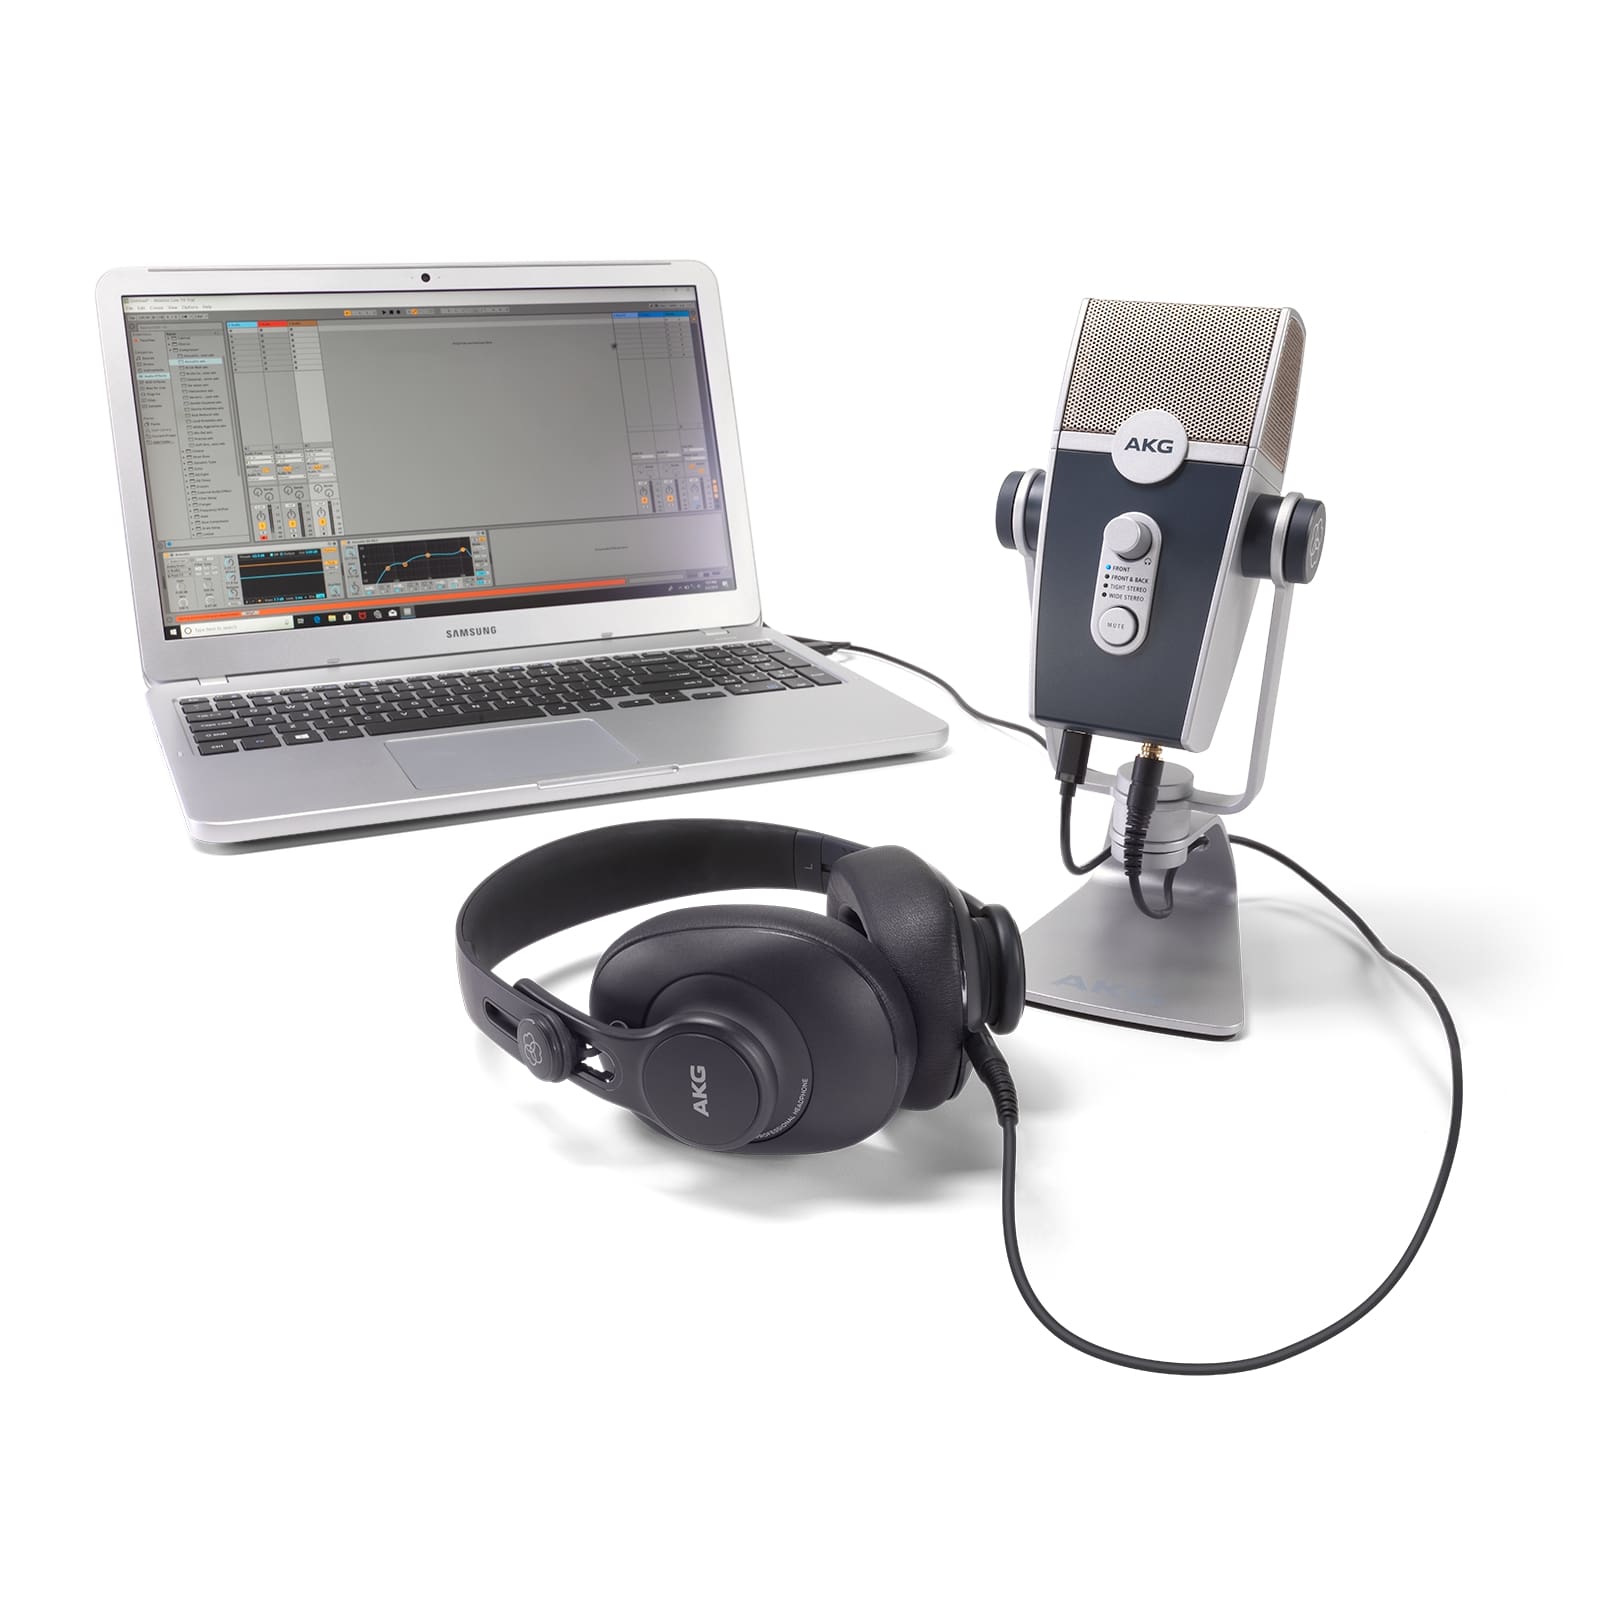 AKG Podcaster Essentials Lyra USB Microphone And K371 Headphones 5122010-00